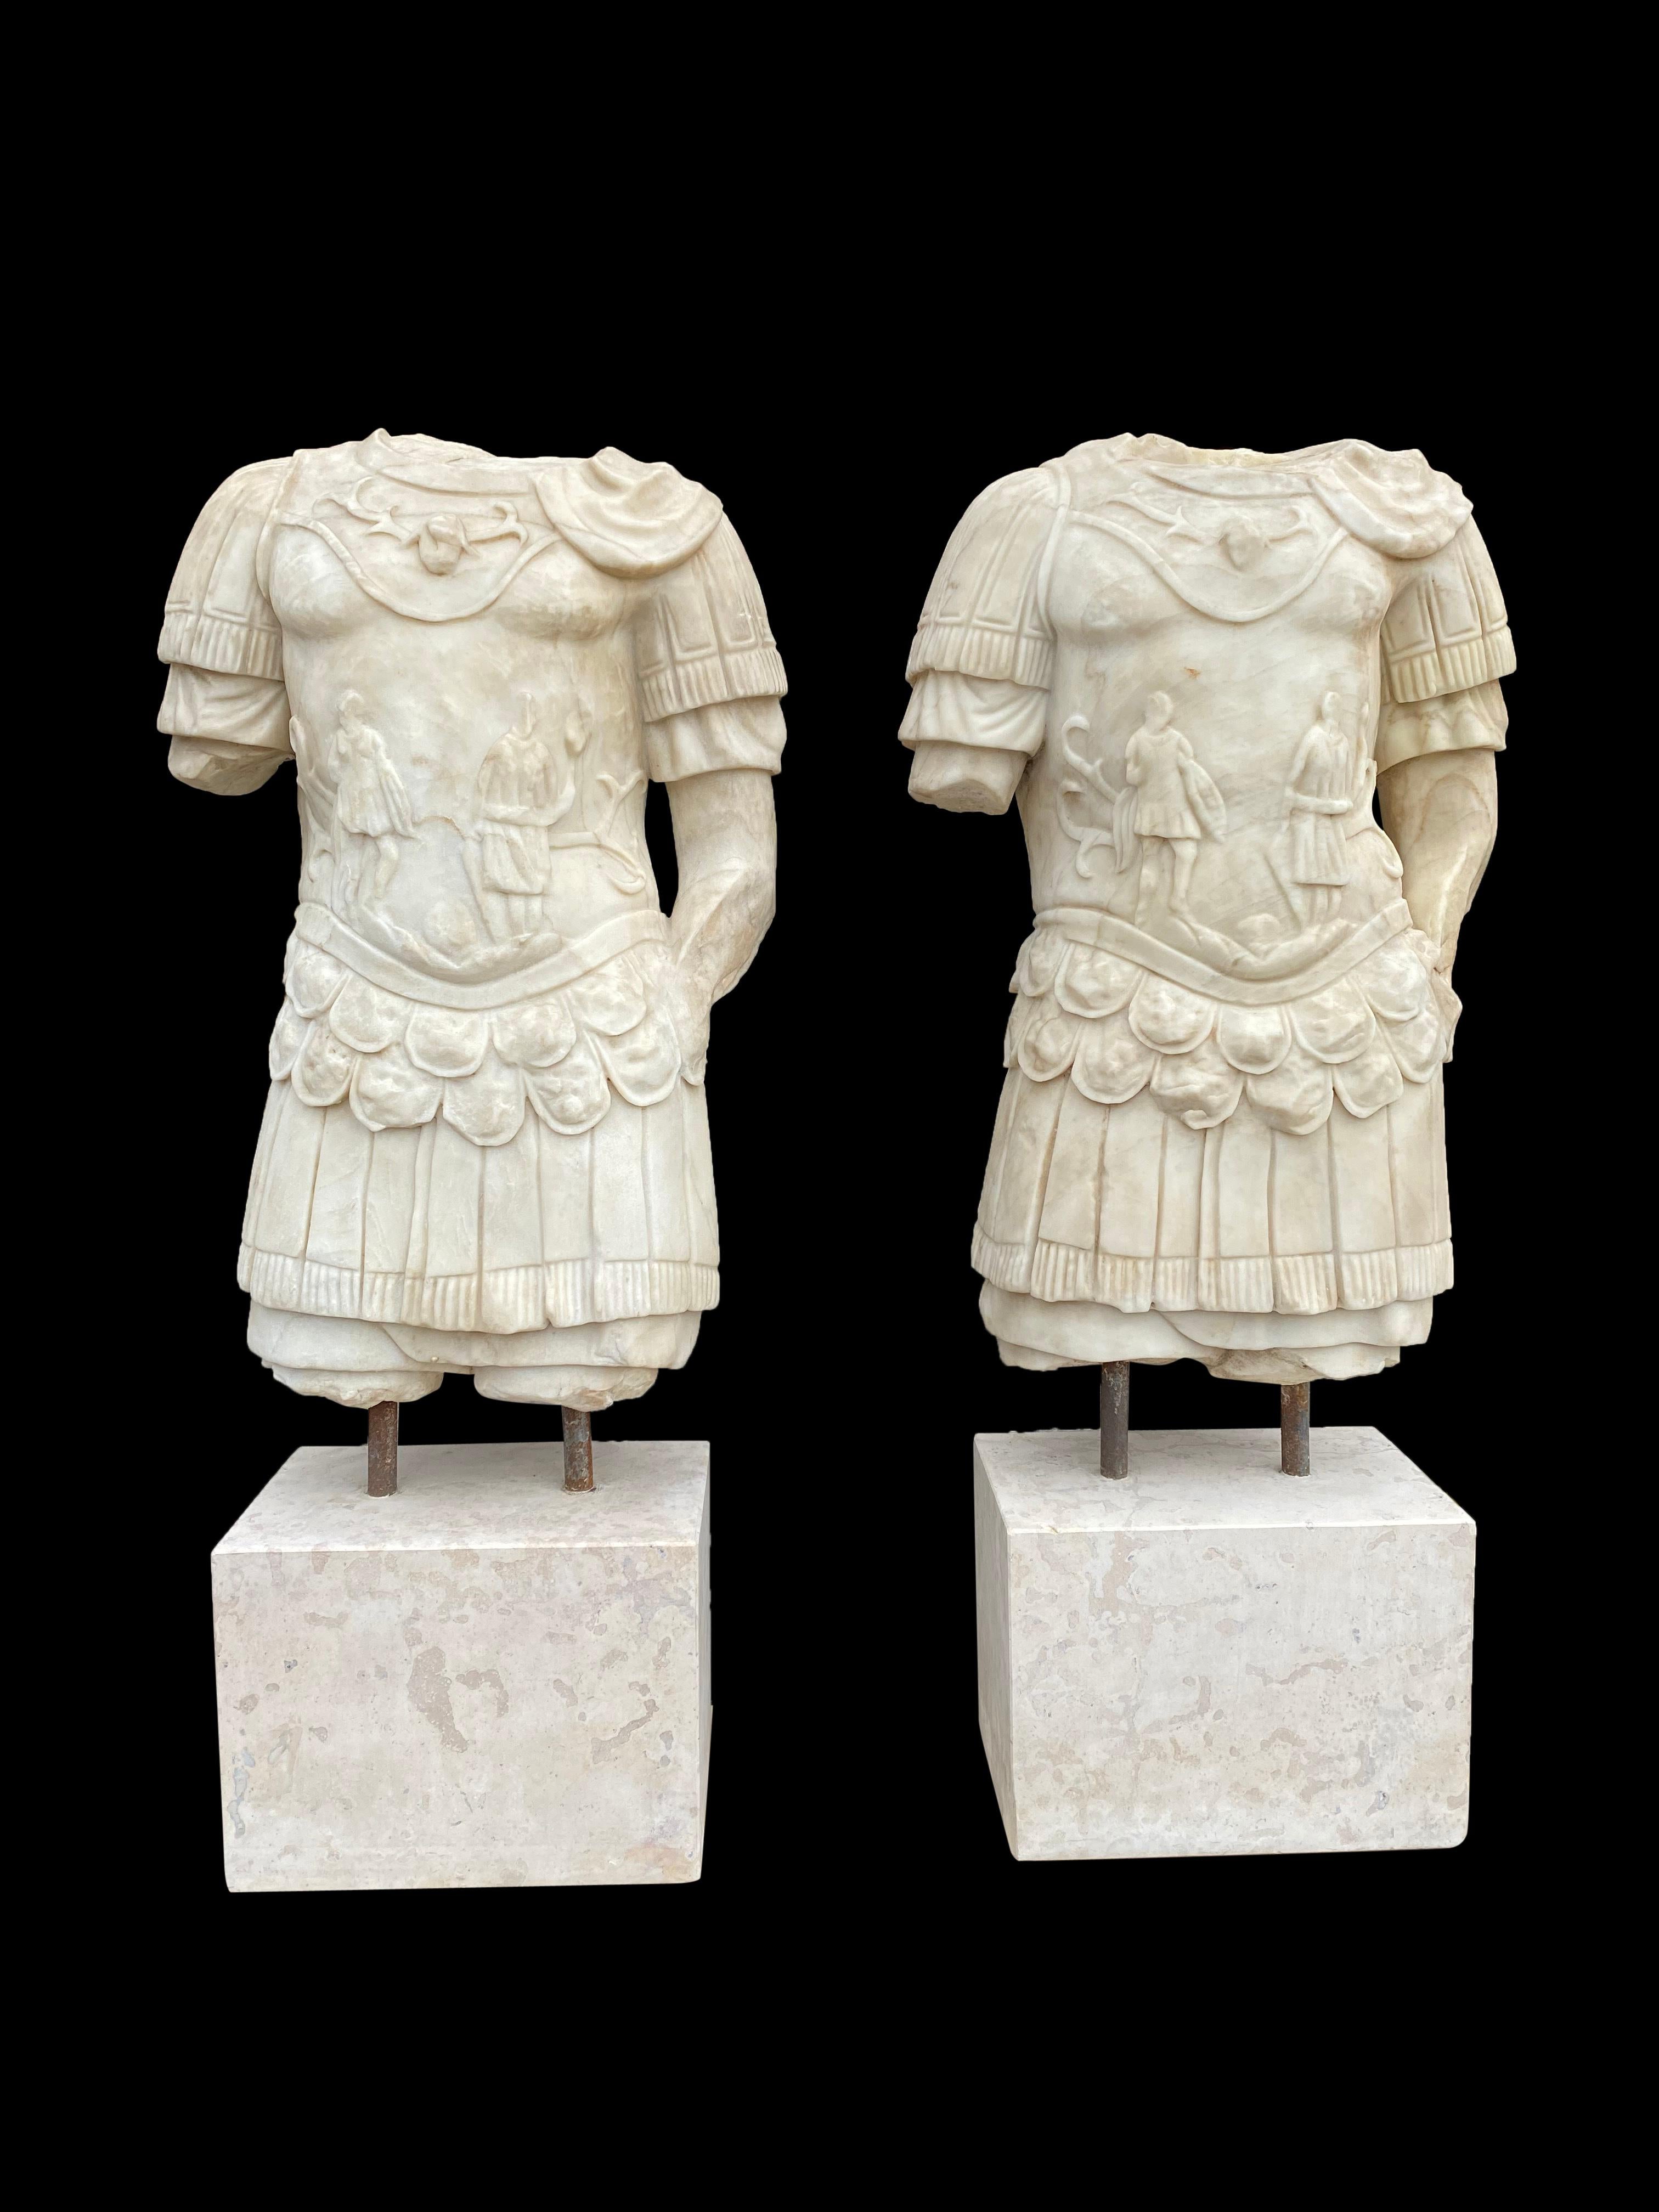 A pair of hand carved 20th century pair of Roman Emperors Torso’s. The torso is carved from weathered statutory marble on a travertine base.

One of the most striking objects on display in the Mary and Michael Jaharis Galleries of Greek, Roman,